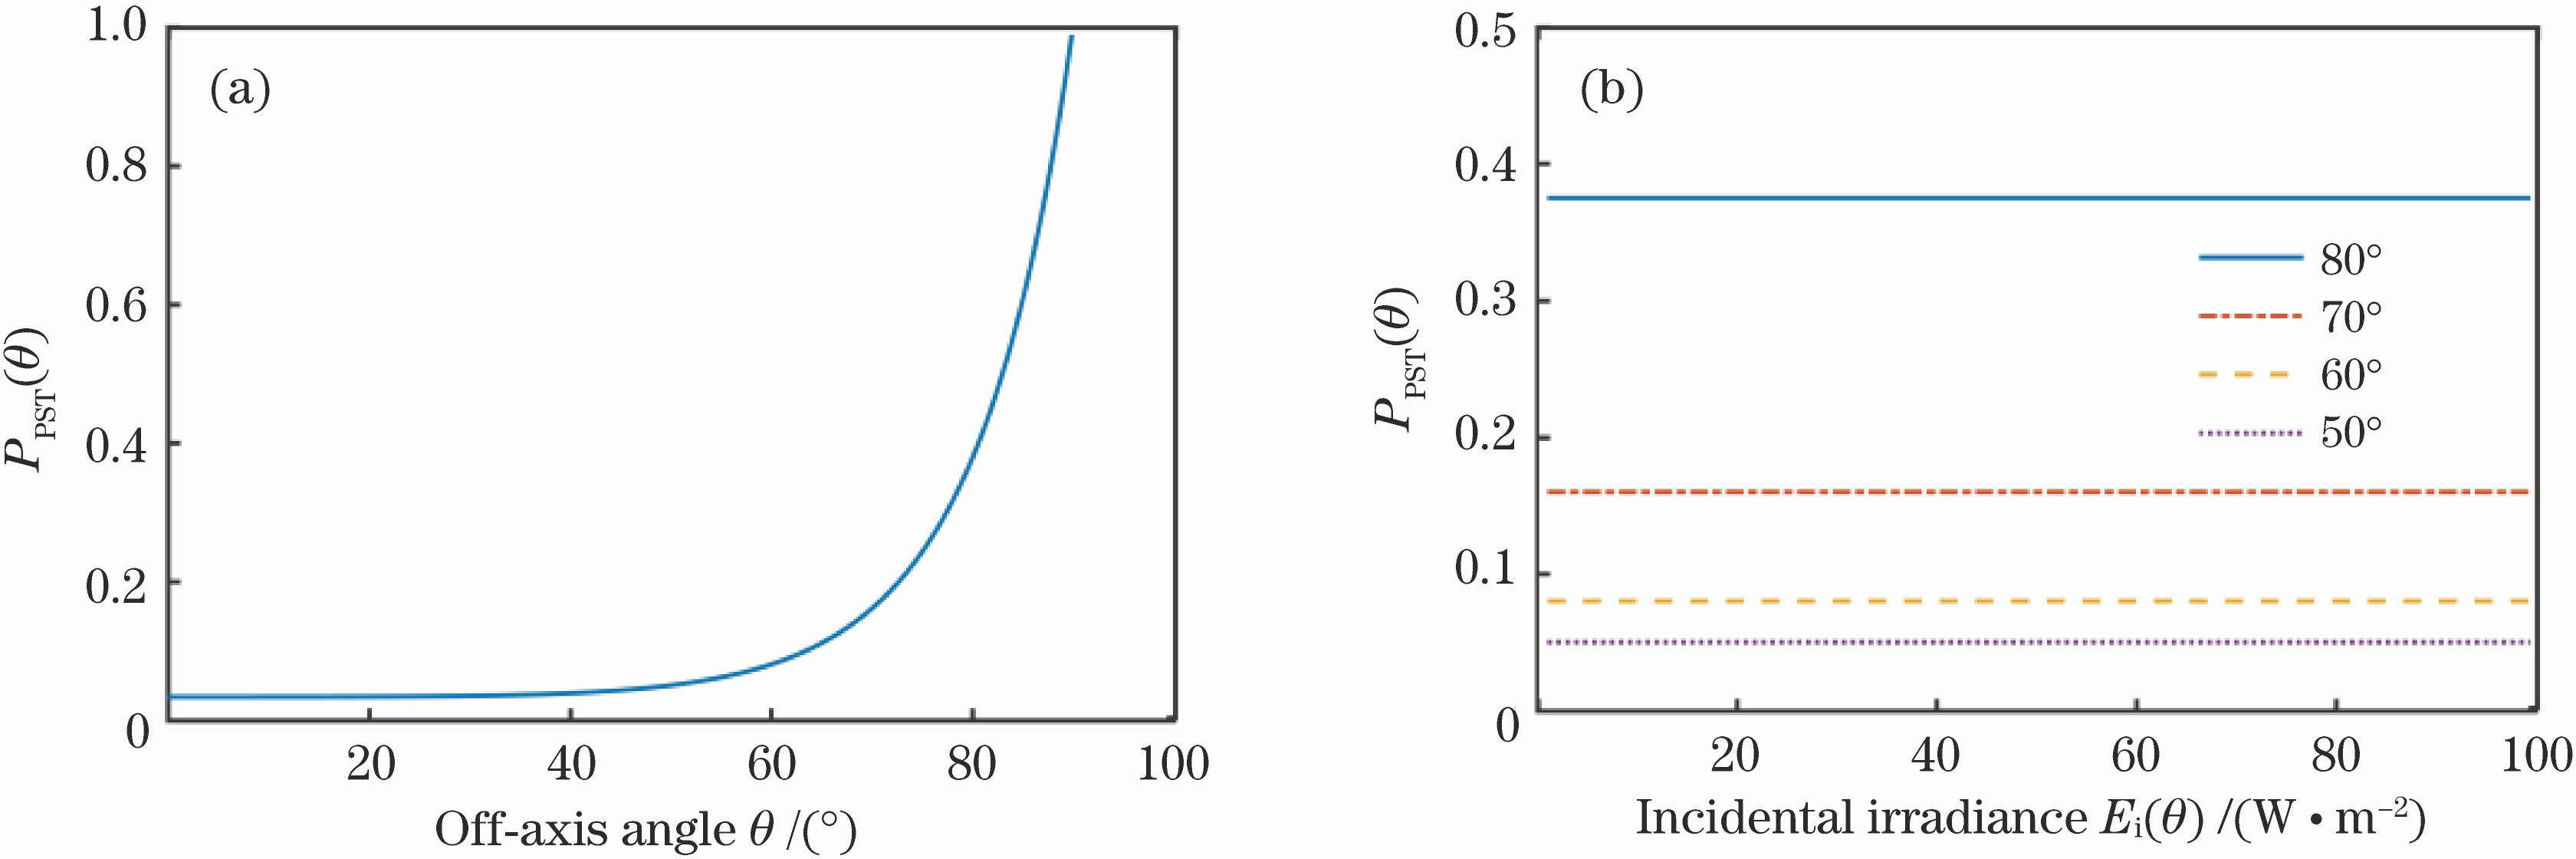 Varying curves of PST values under different conditions. (a) PST value as a function of off-axis angle; (b) PST value as a function of irradiance